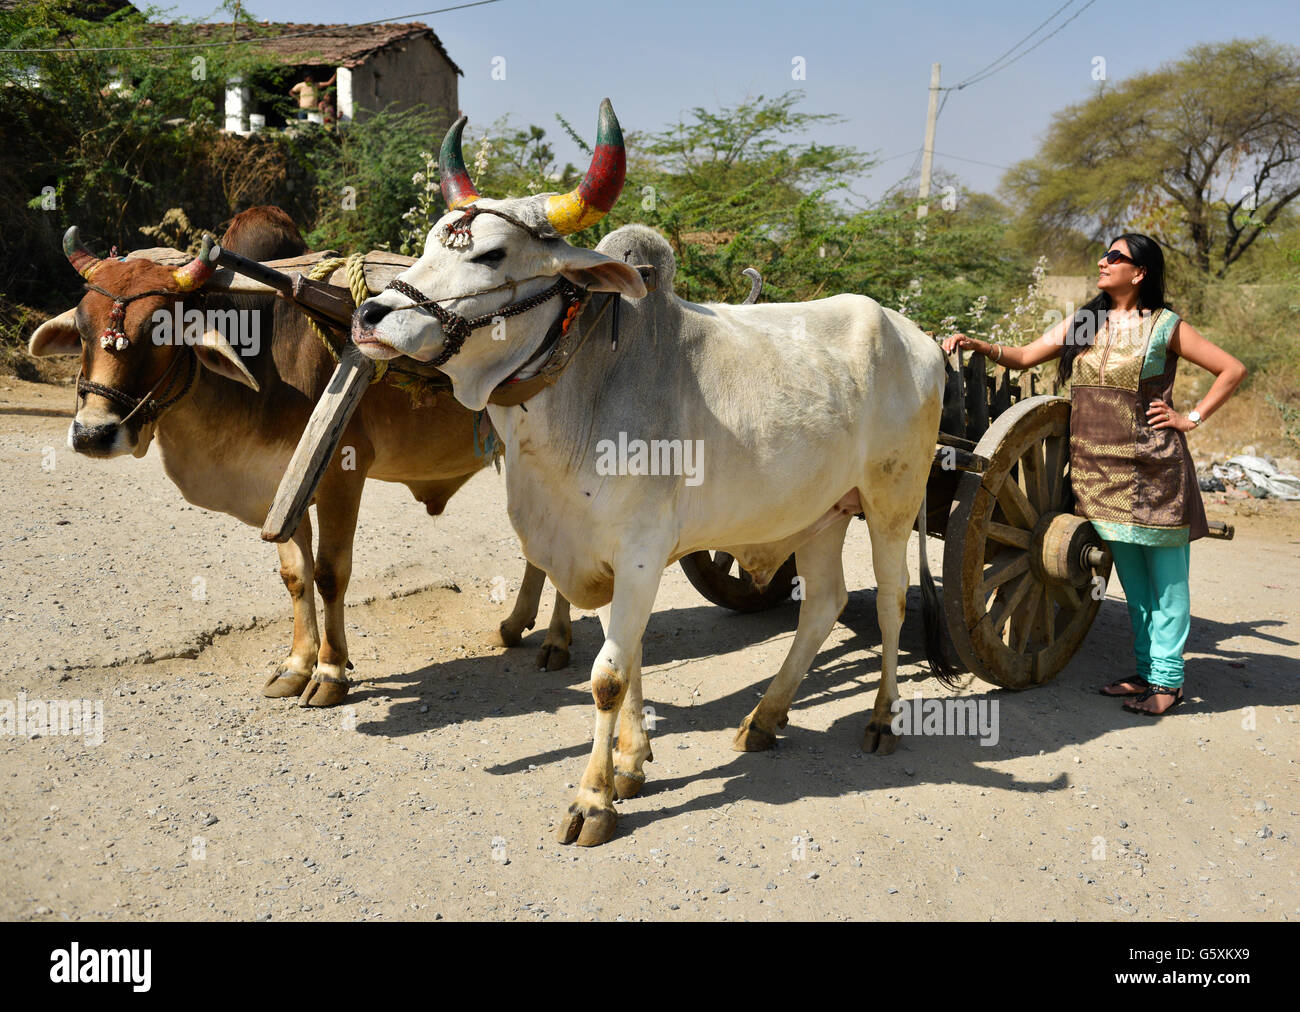 Beautiful urban woman with long black hair expressing farewell to friends and vying for attention in showing off her preparation to get on bull cart. Stock Photo